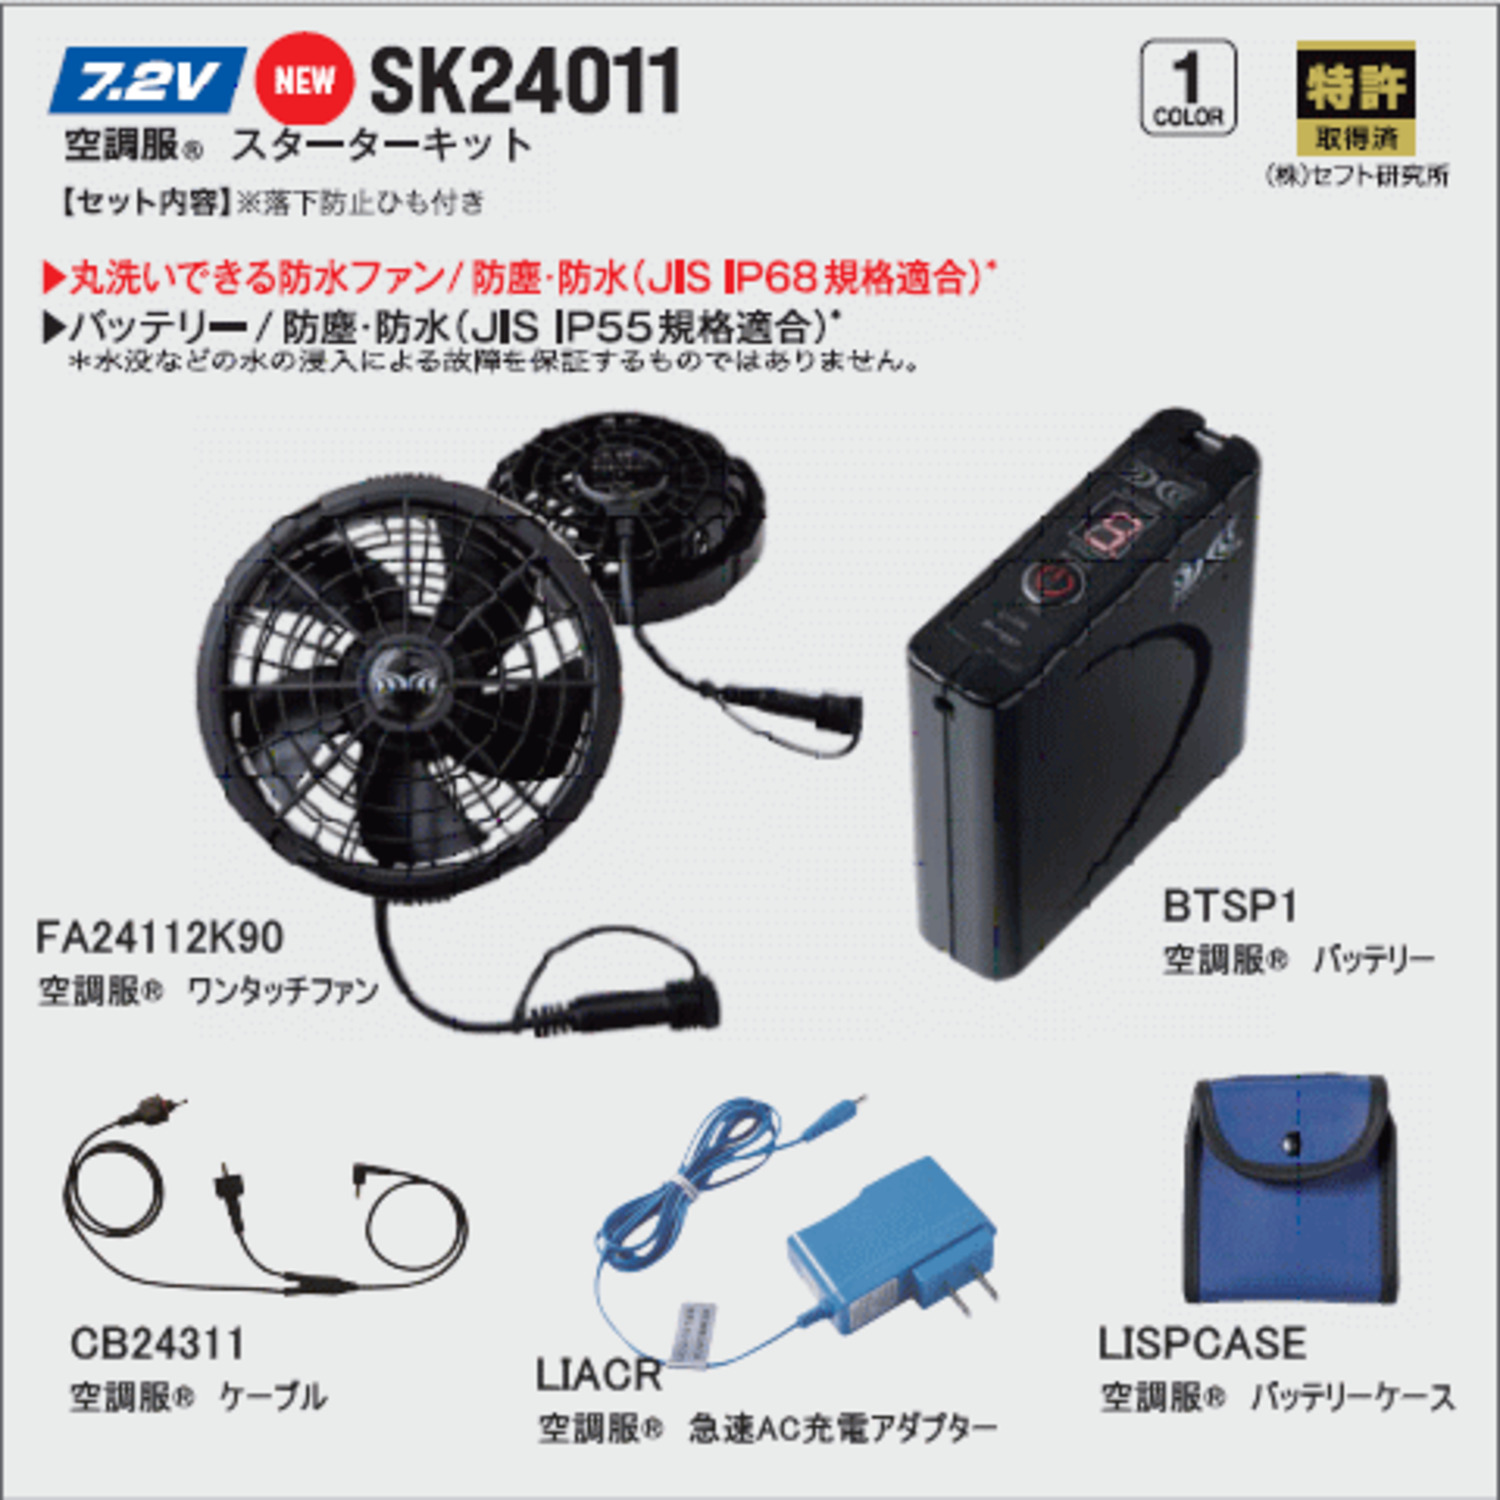 NEW 7.2V　空調服®　スターキット